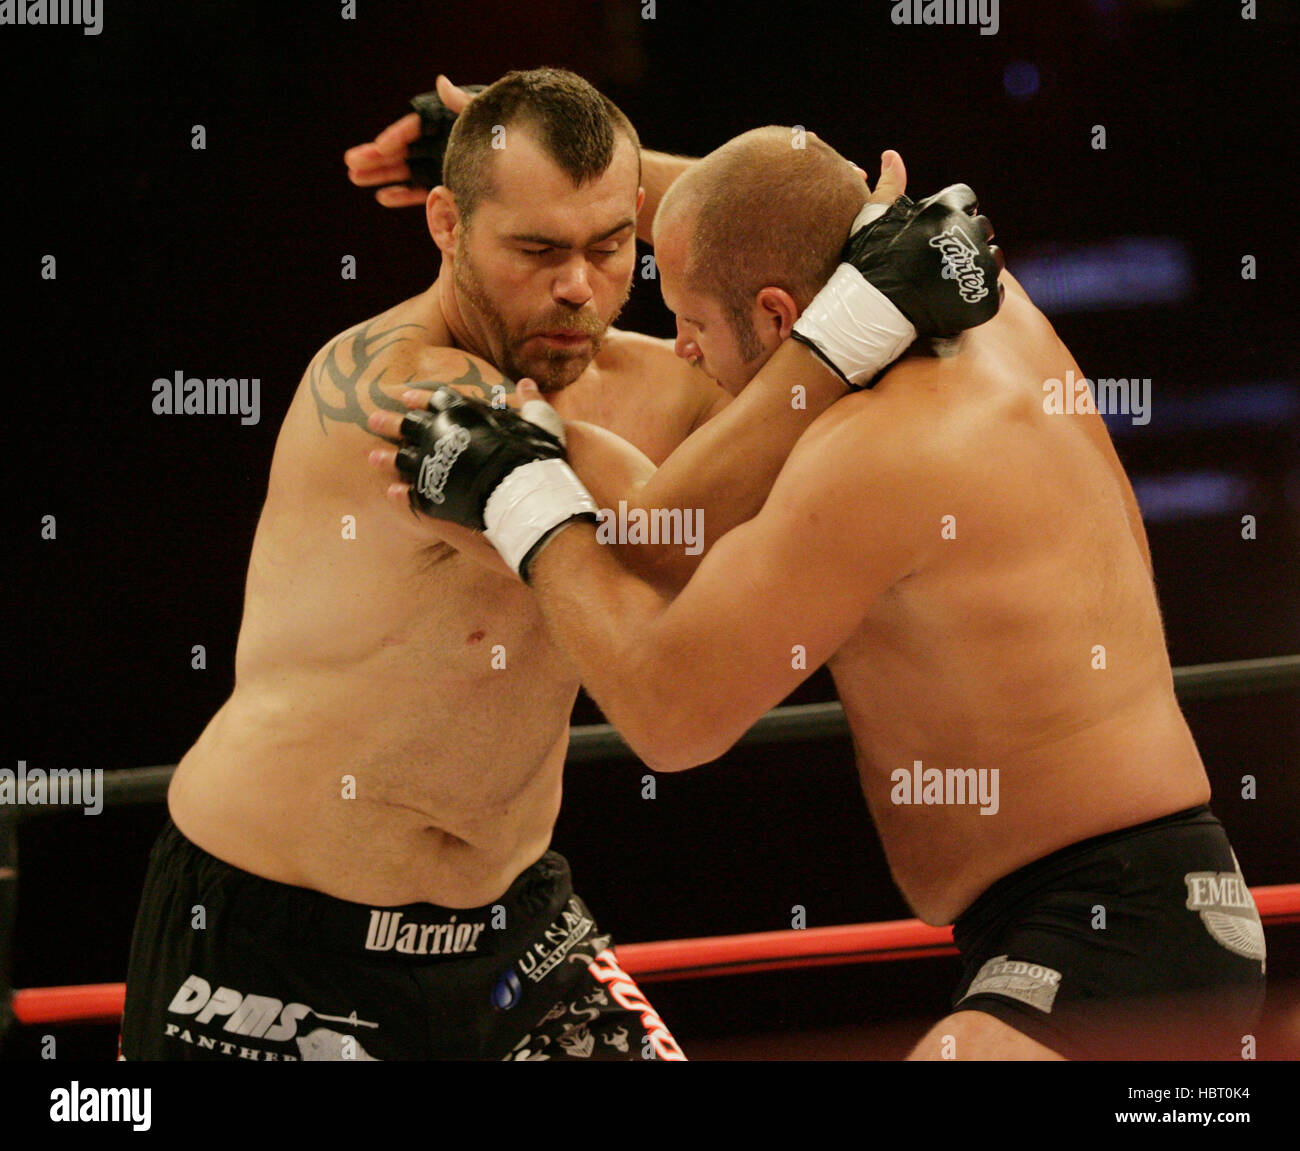 Fedor Emelianenko, right, fights Tim Sylvia at Affliction's 'Banned' a mixed martial arts fight at the Honda Center on July 19, 2008 in Anaheim, California. Francis Specker Stock Photo